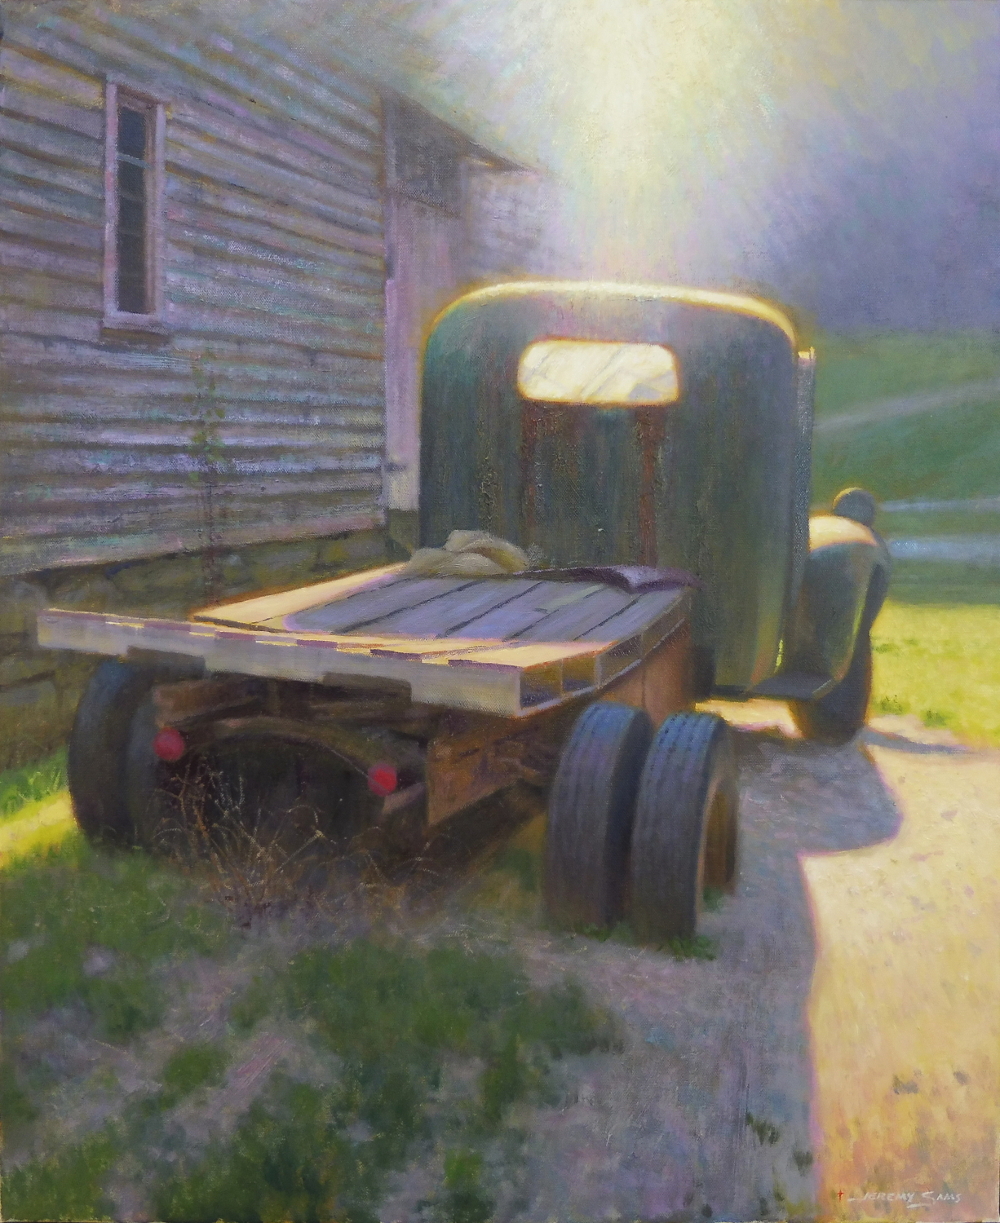 painting of old truck with sunlight in Valle Crucis North Carolina by North Carolina artist Jeremy Sams